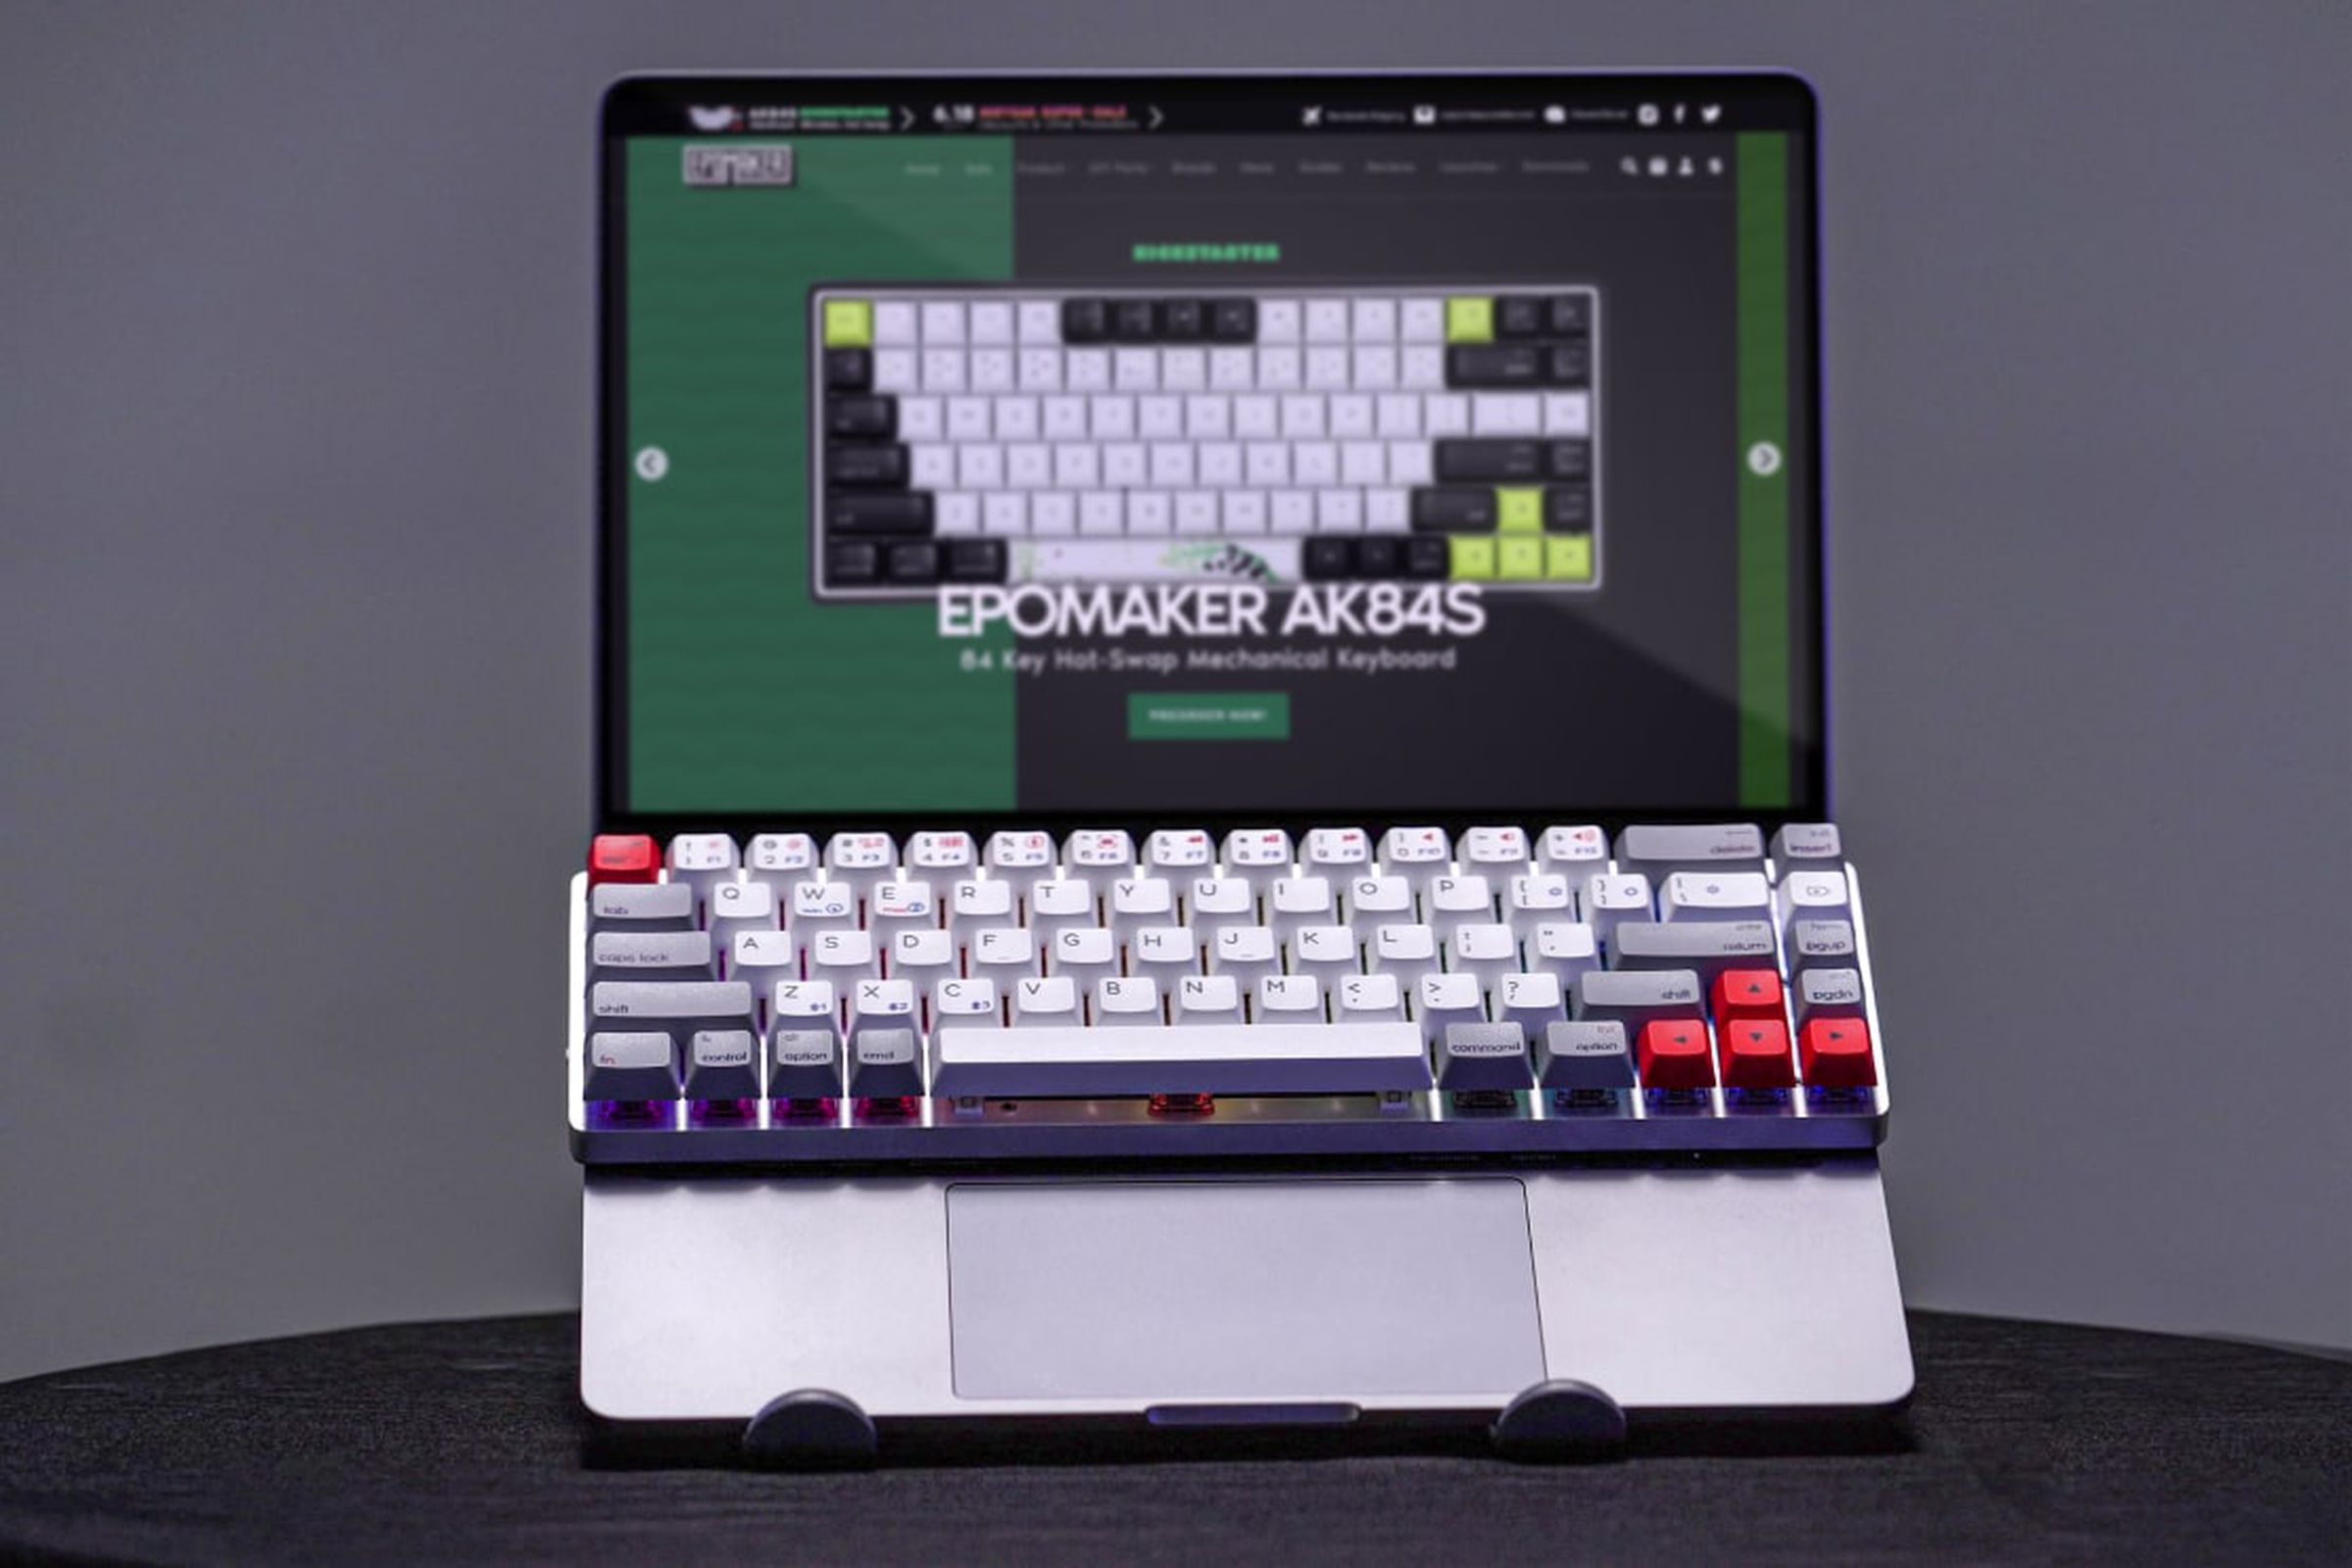 The NT68 is designed to sit on top of your laptop’s existing keyboard.